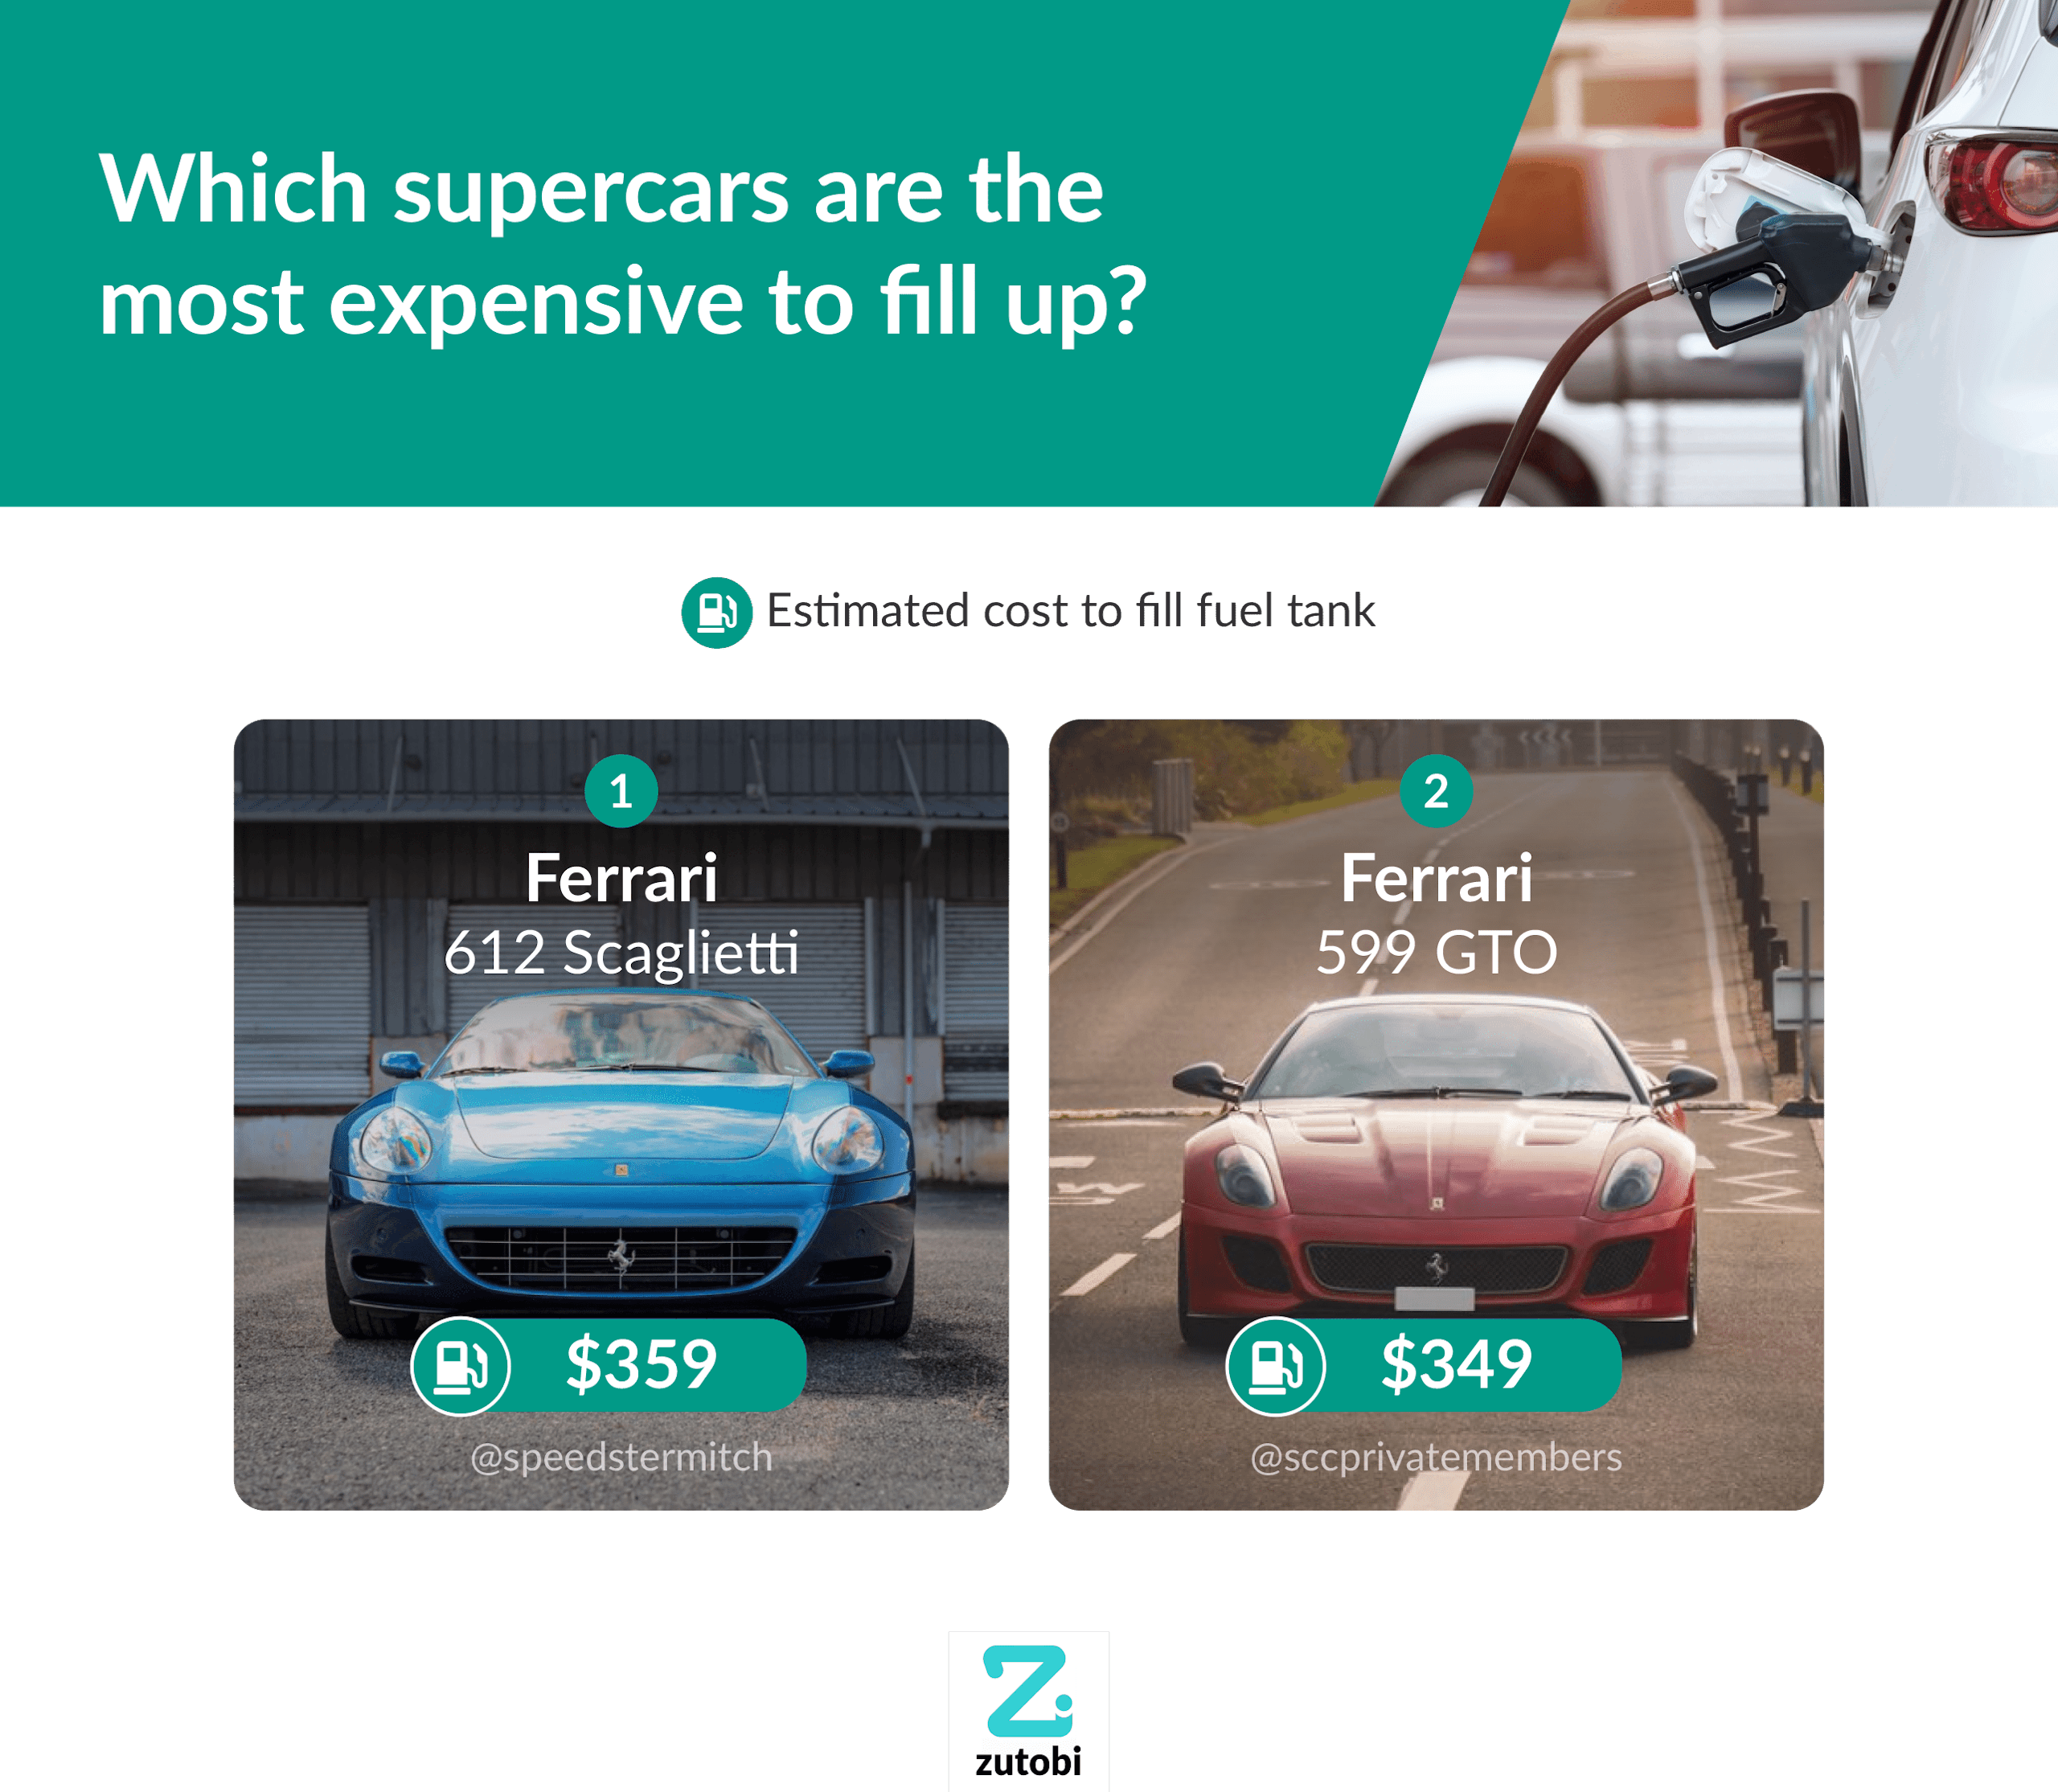 Which supercars are the most expensive to fill up?